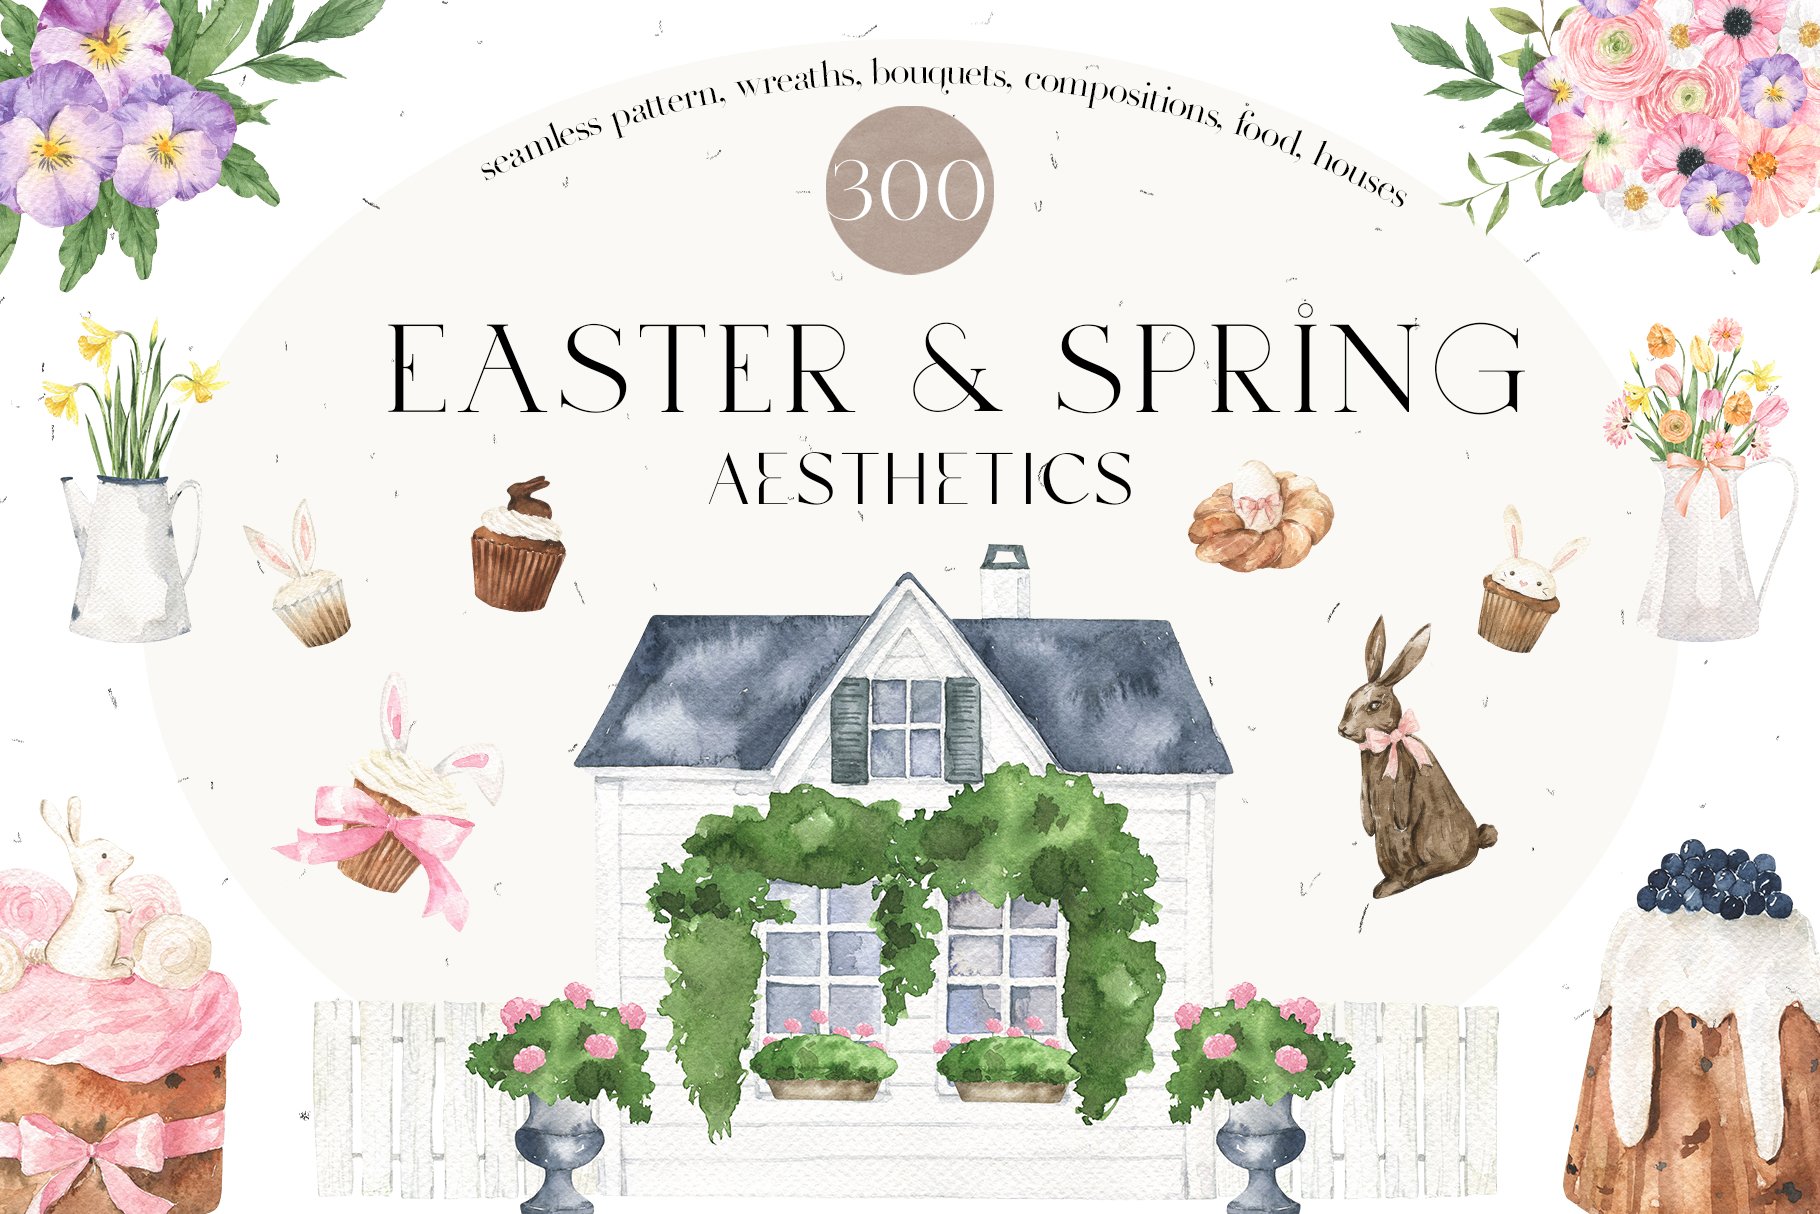 So calm and beautiful Easter illustrations.